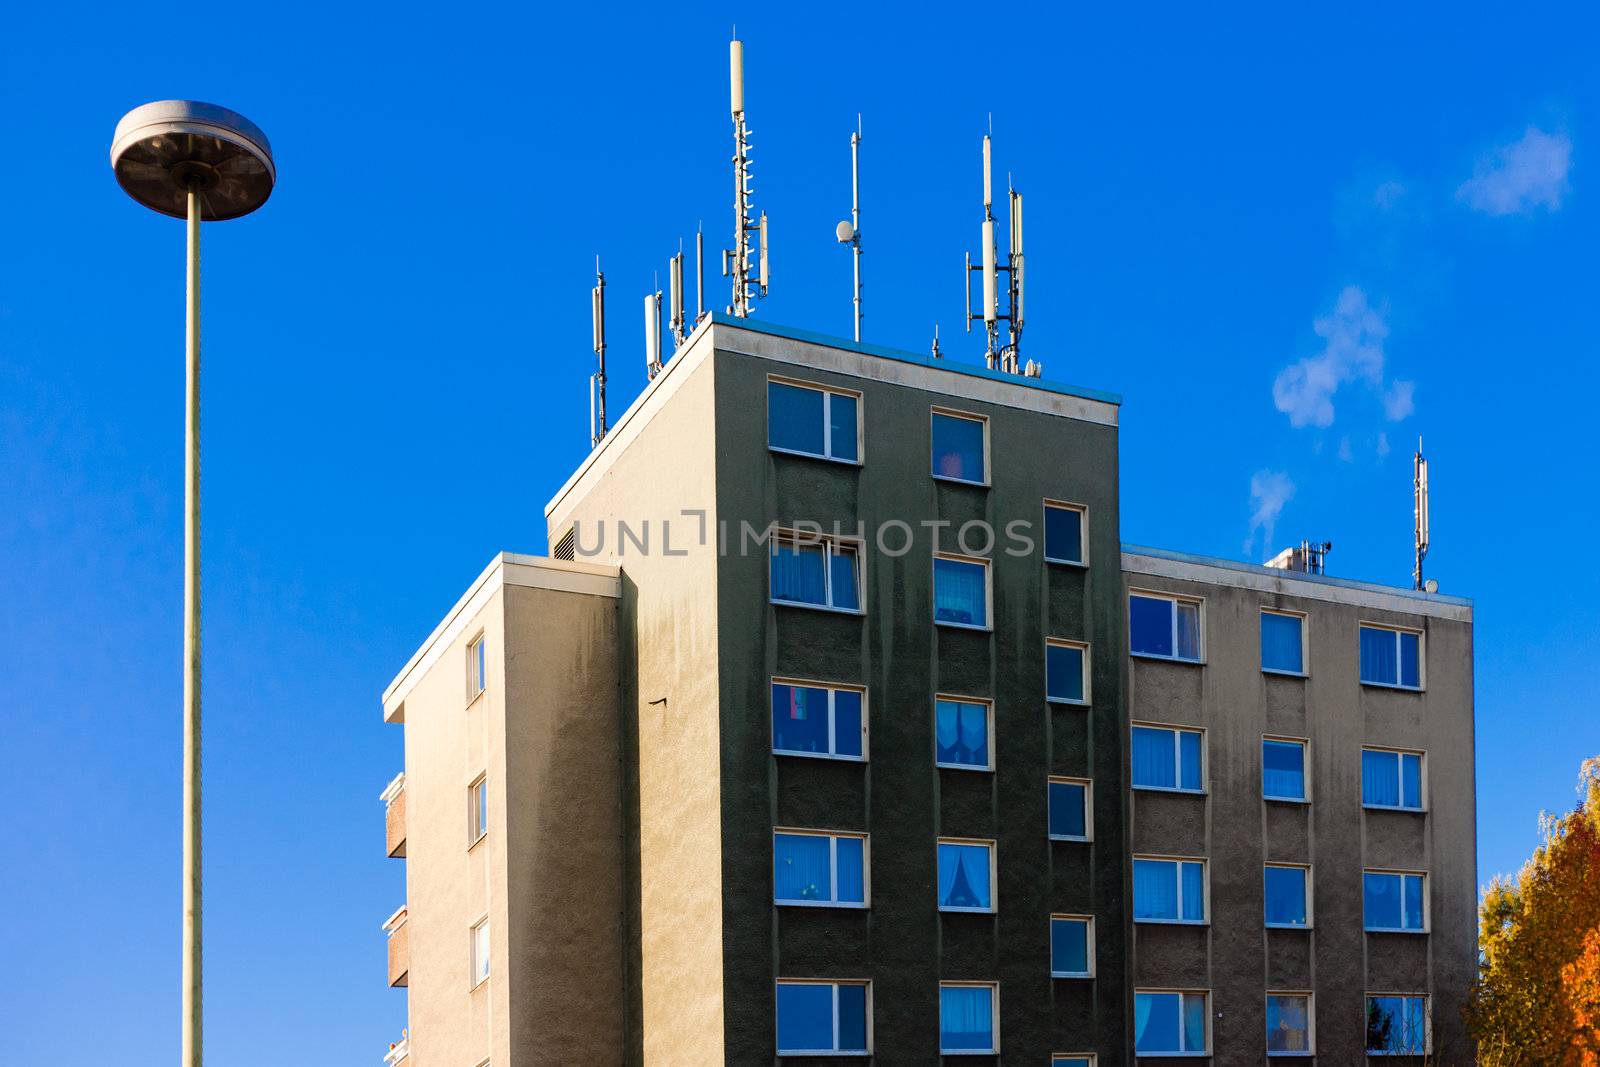 Apartment house with cellular antennas on roof for cellphone service.